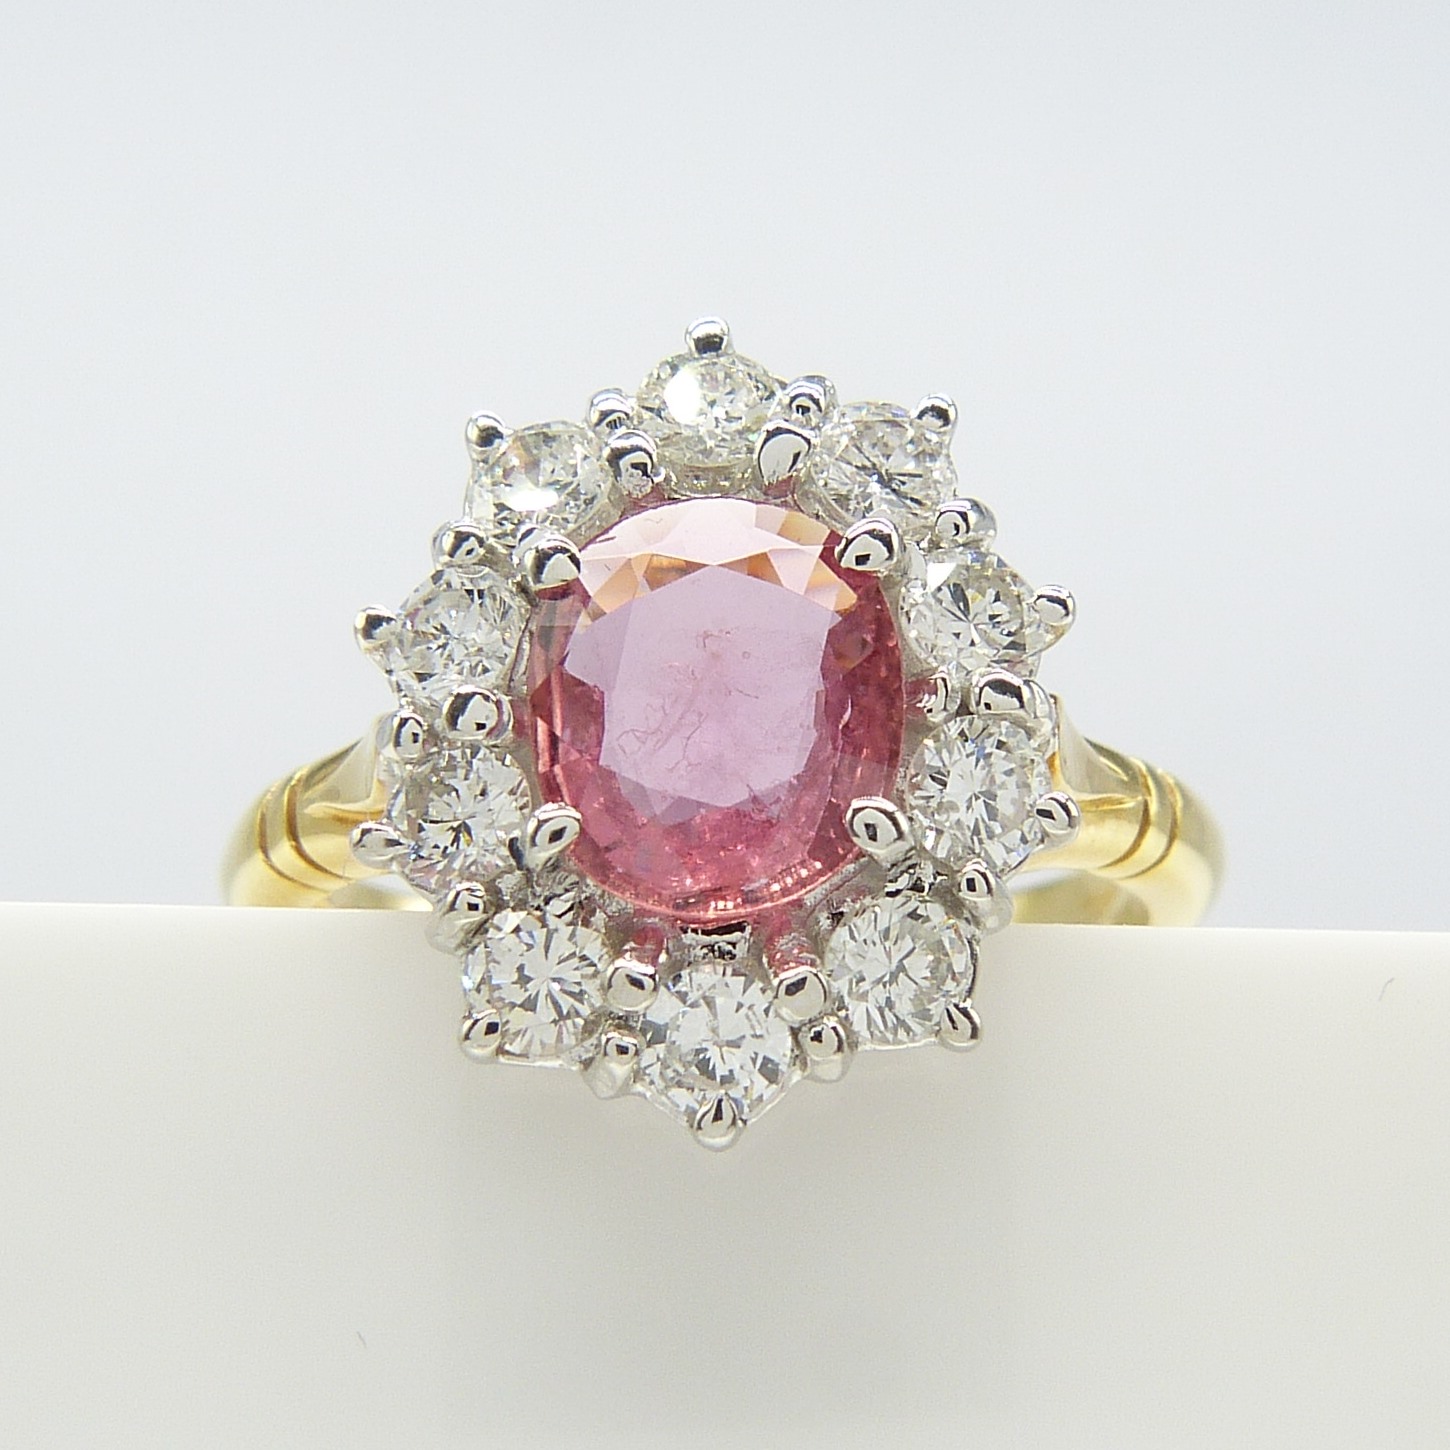 A pinkish-red natural Ruby and Diamond cluster ring in 18ct yellow and white Gold